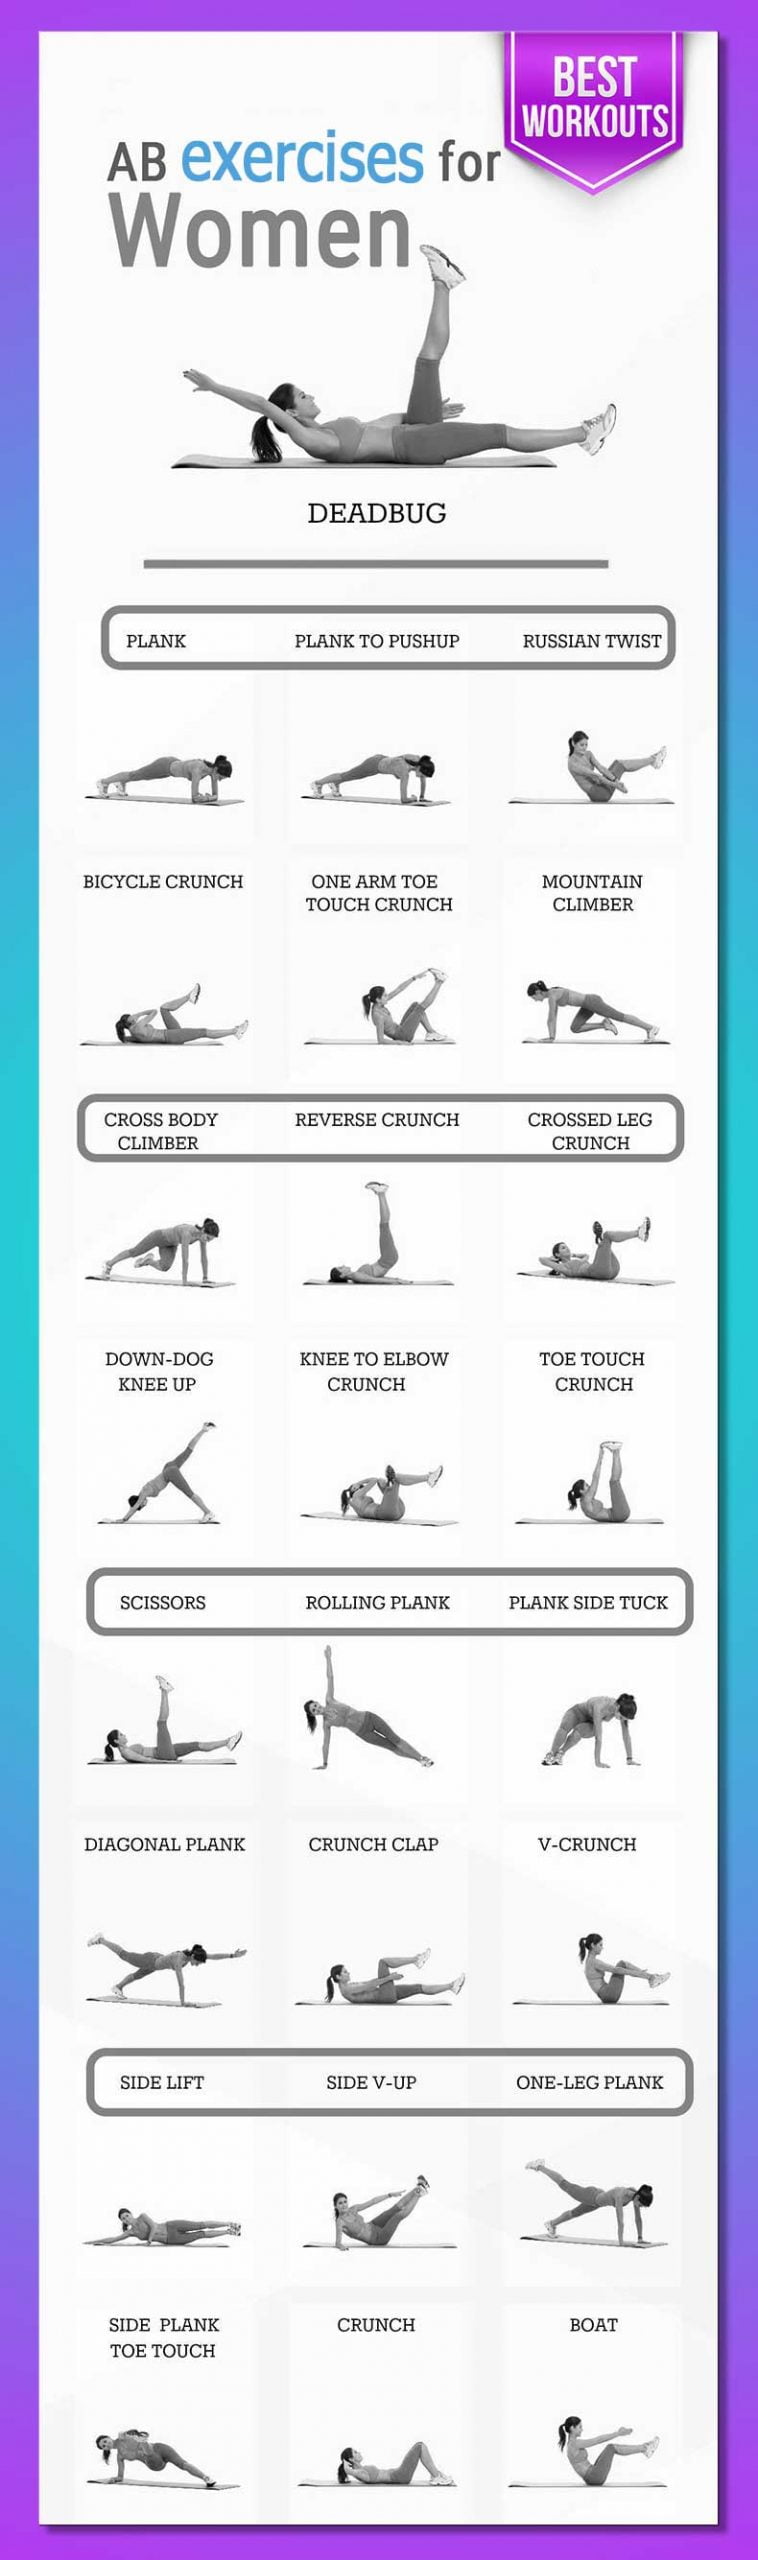 best-workouts-for-women-ab-exercises-no-equipment